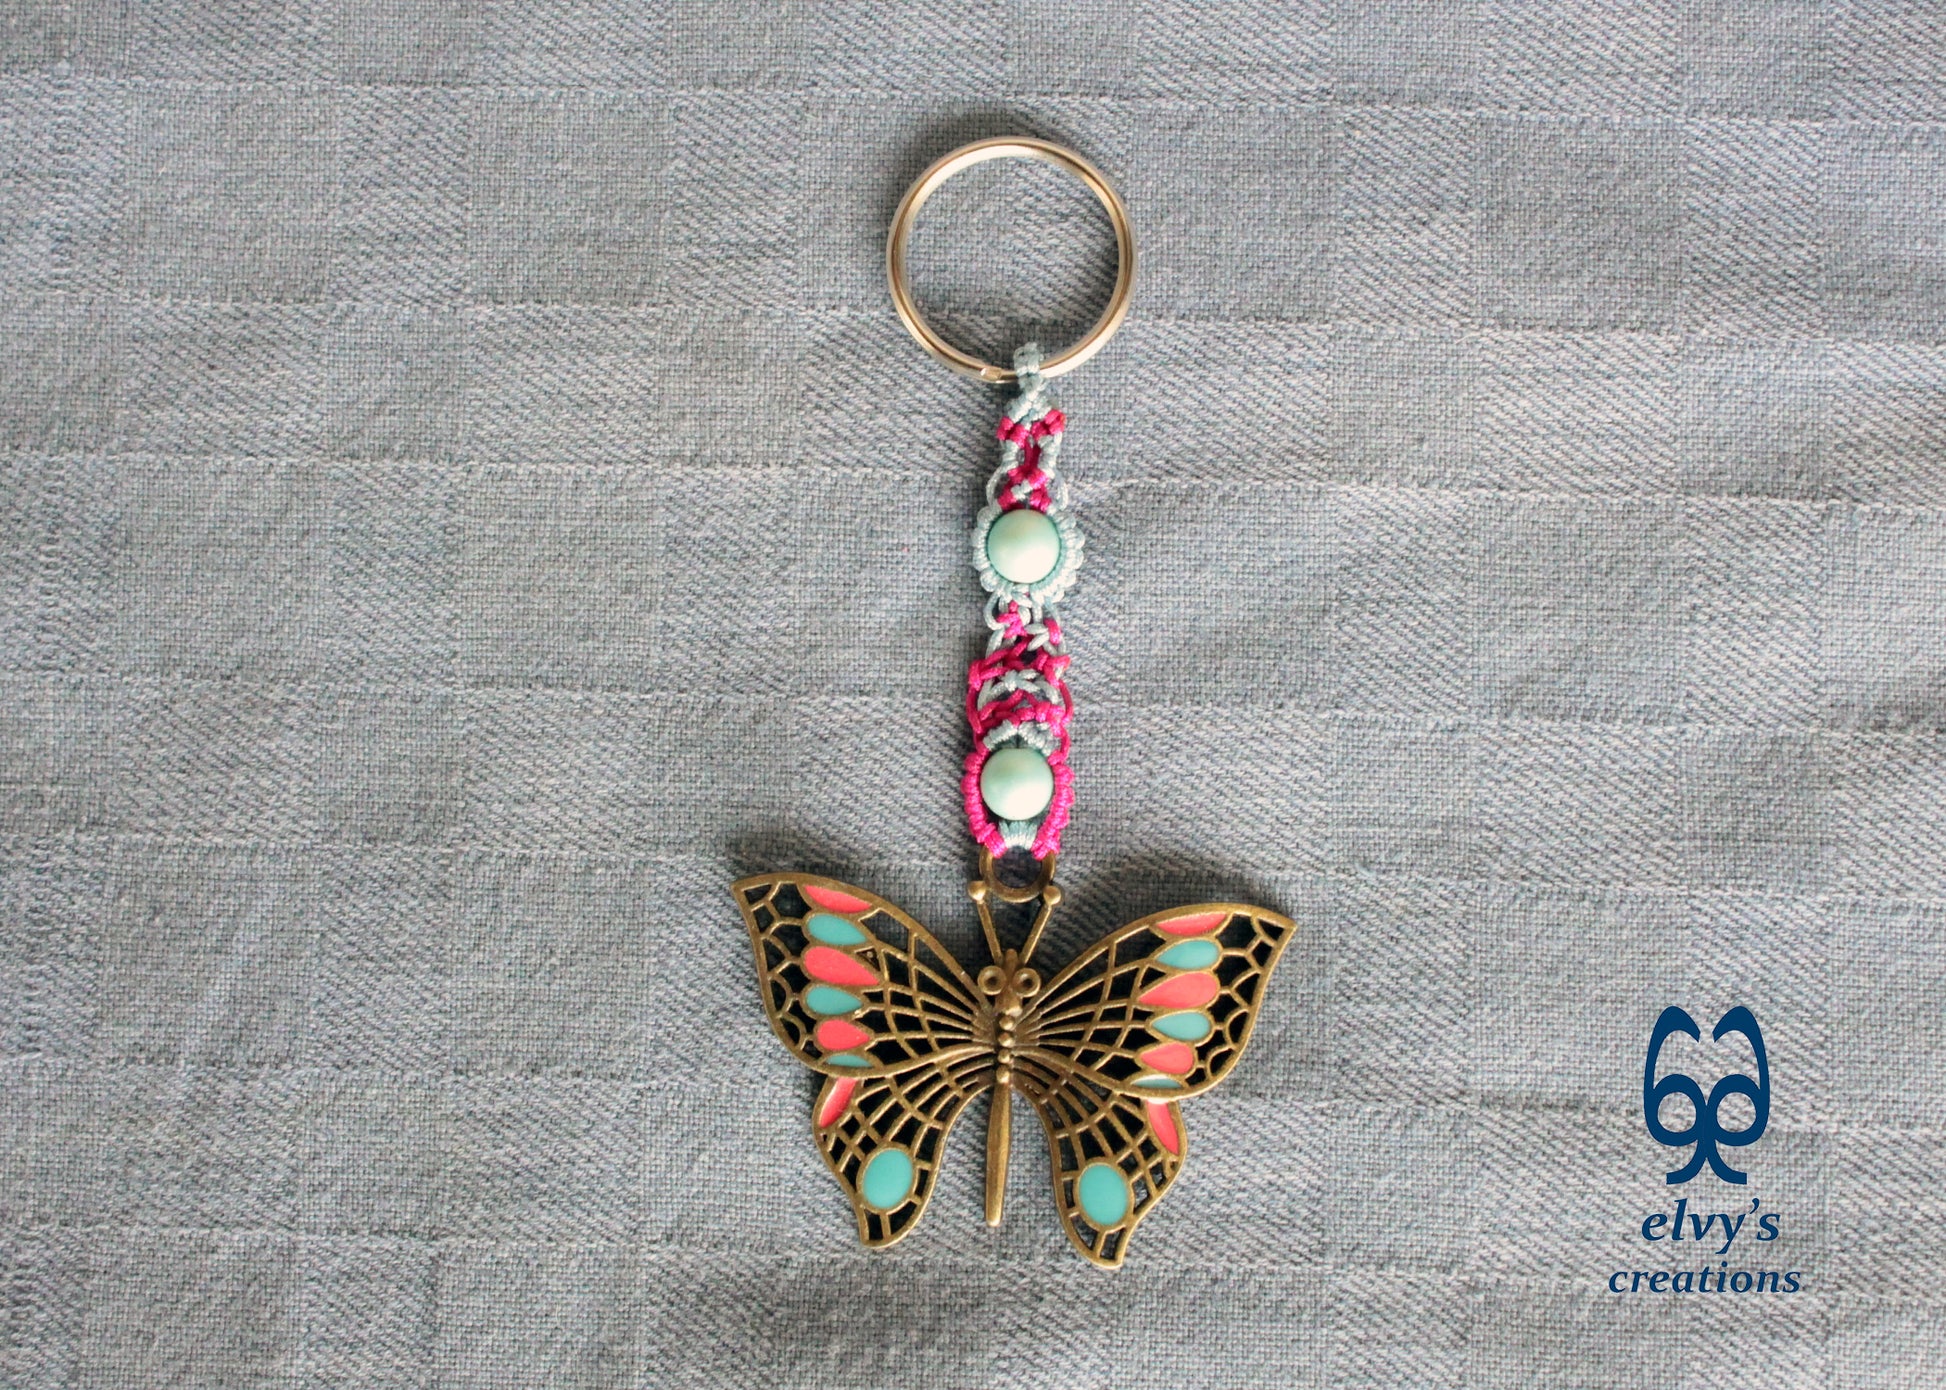 Handmade Macrame Key Chain, Butterfly Key Chain, Housewarming Gift, Small Gift for Woman and Man